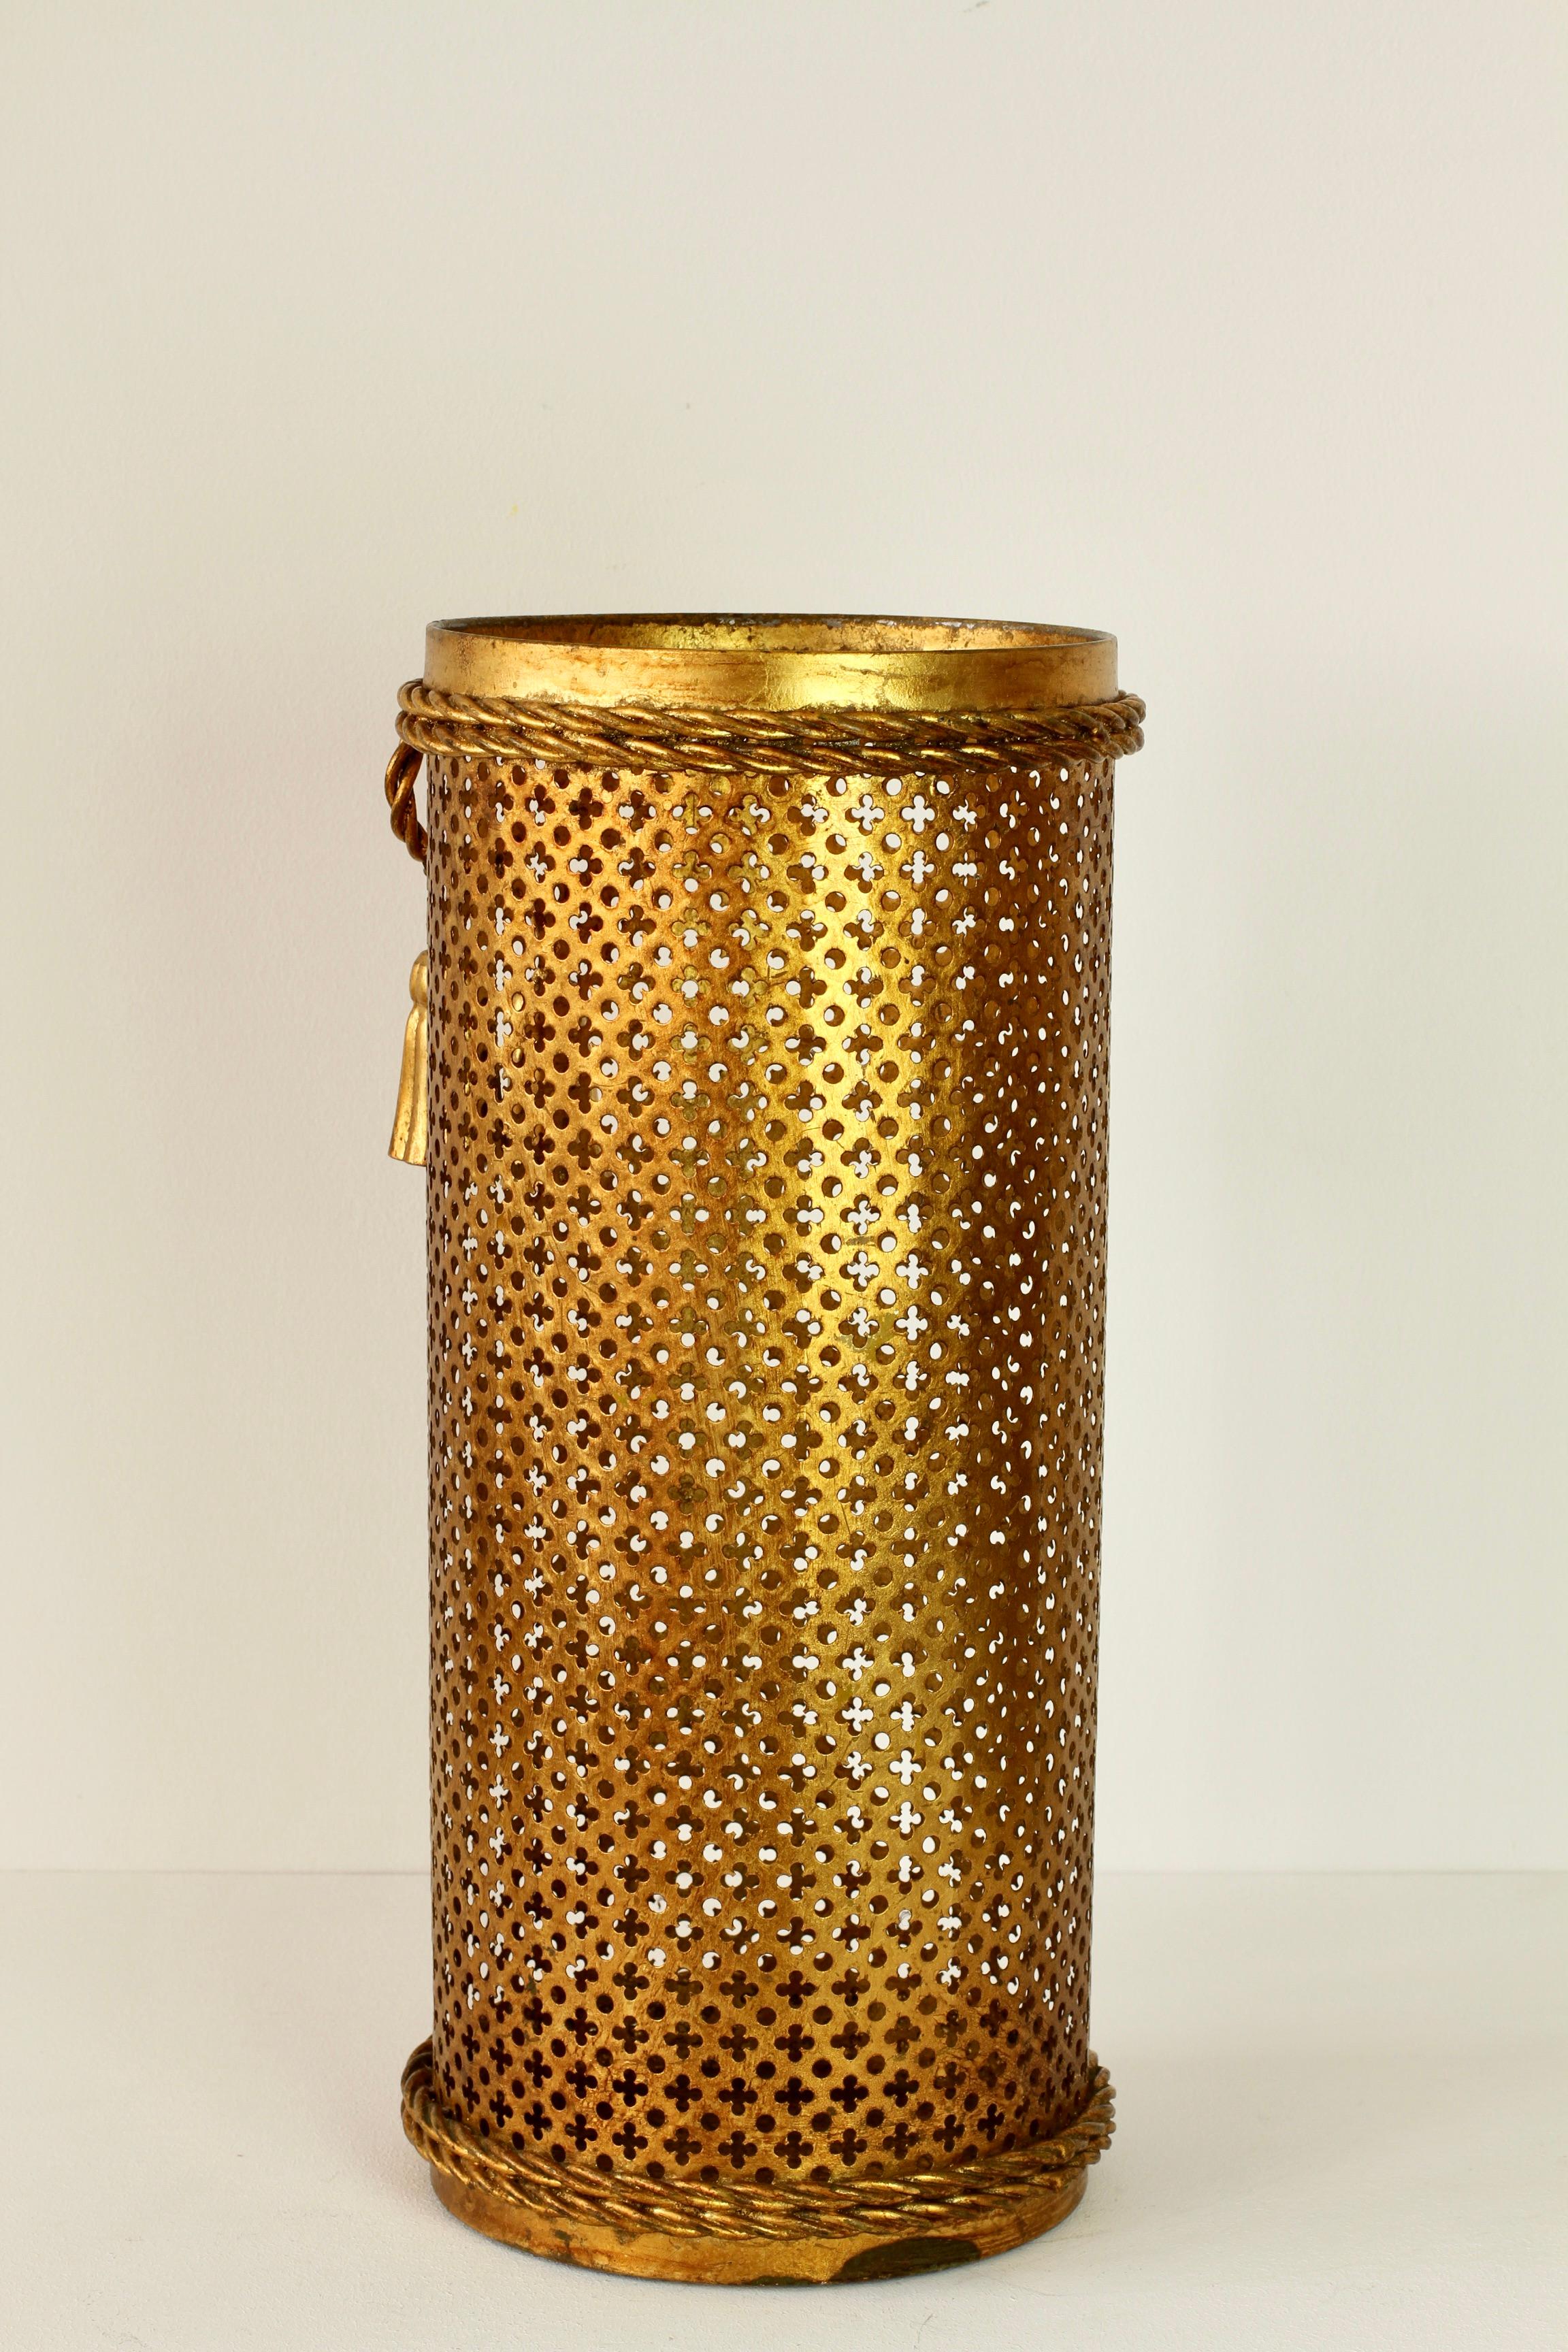 Midcentury Italian Hollywood Regency Gold Gilded Umbrella Stand or Holder, 1950s For Sale 3